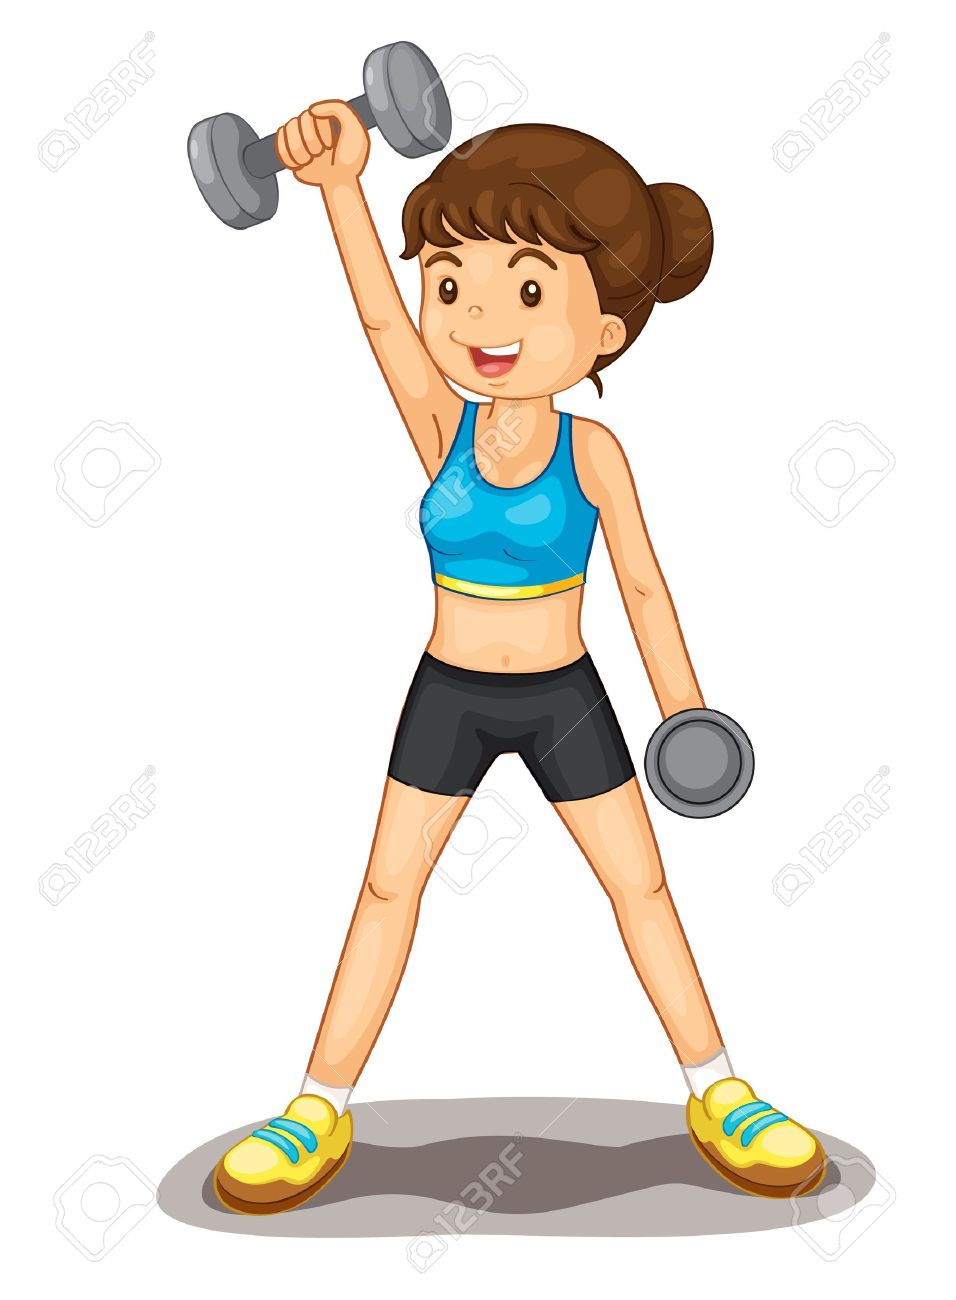 Exercise clipart animated.